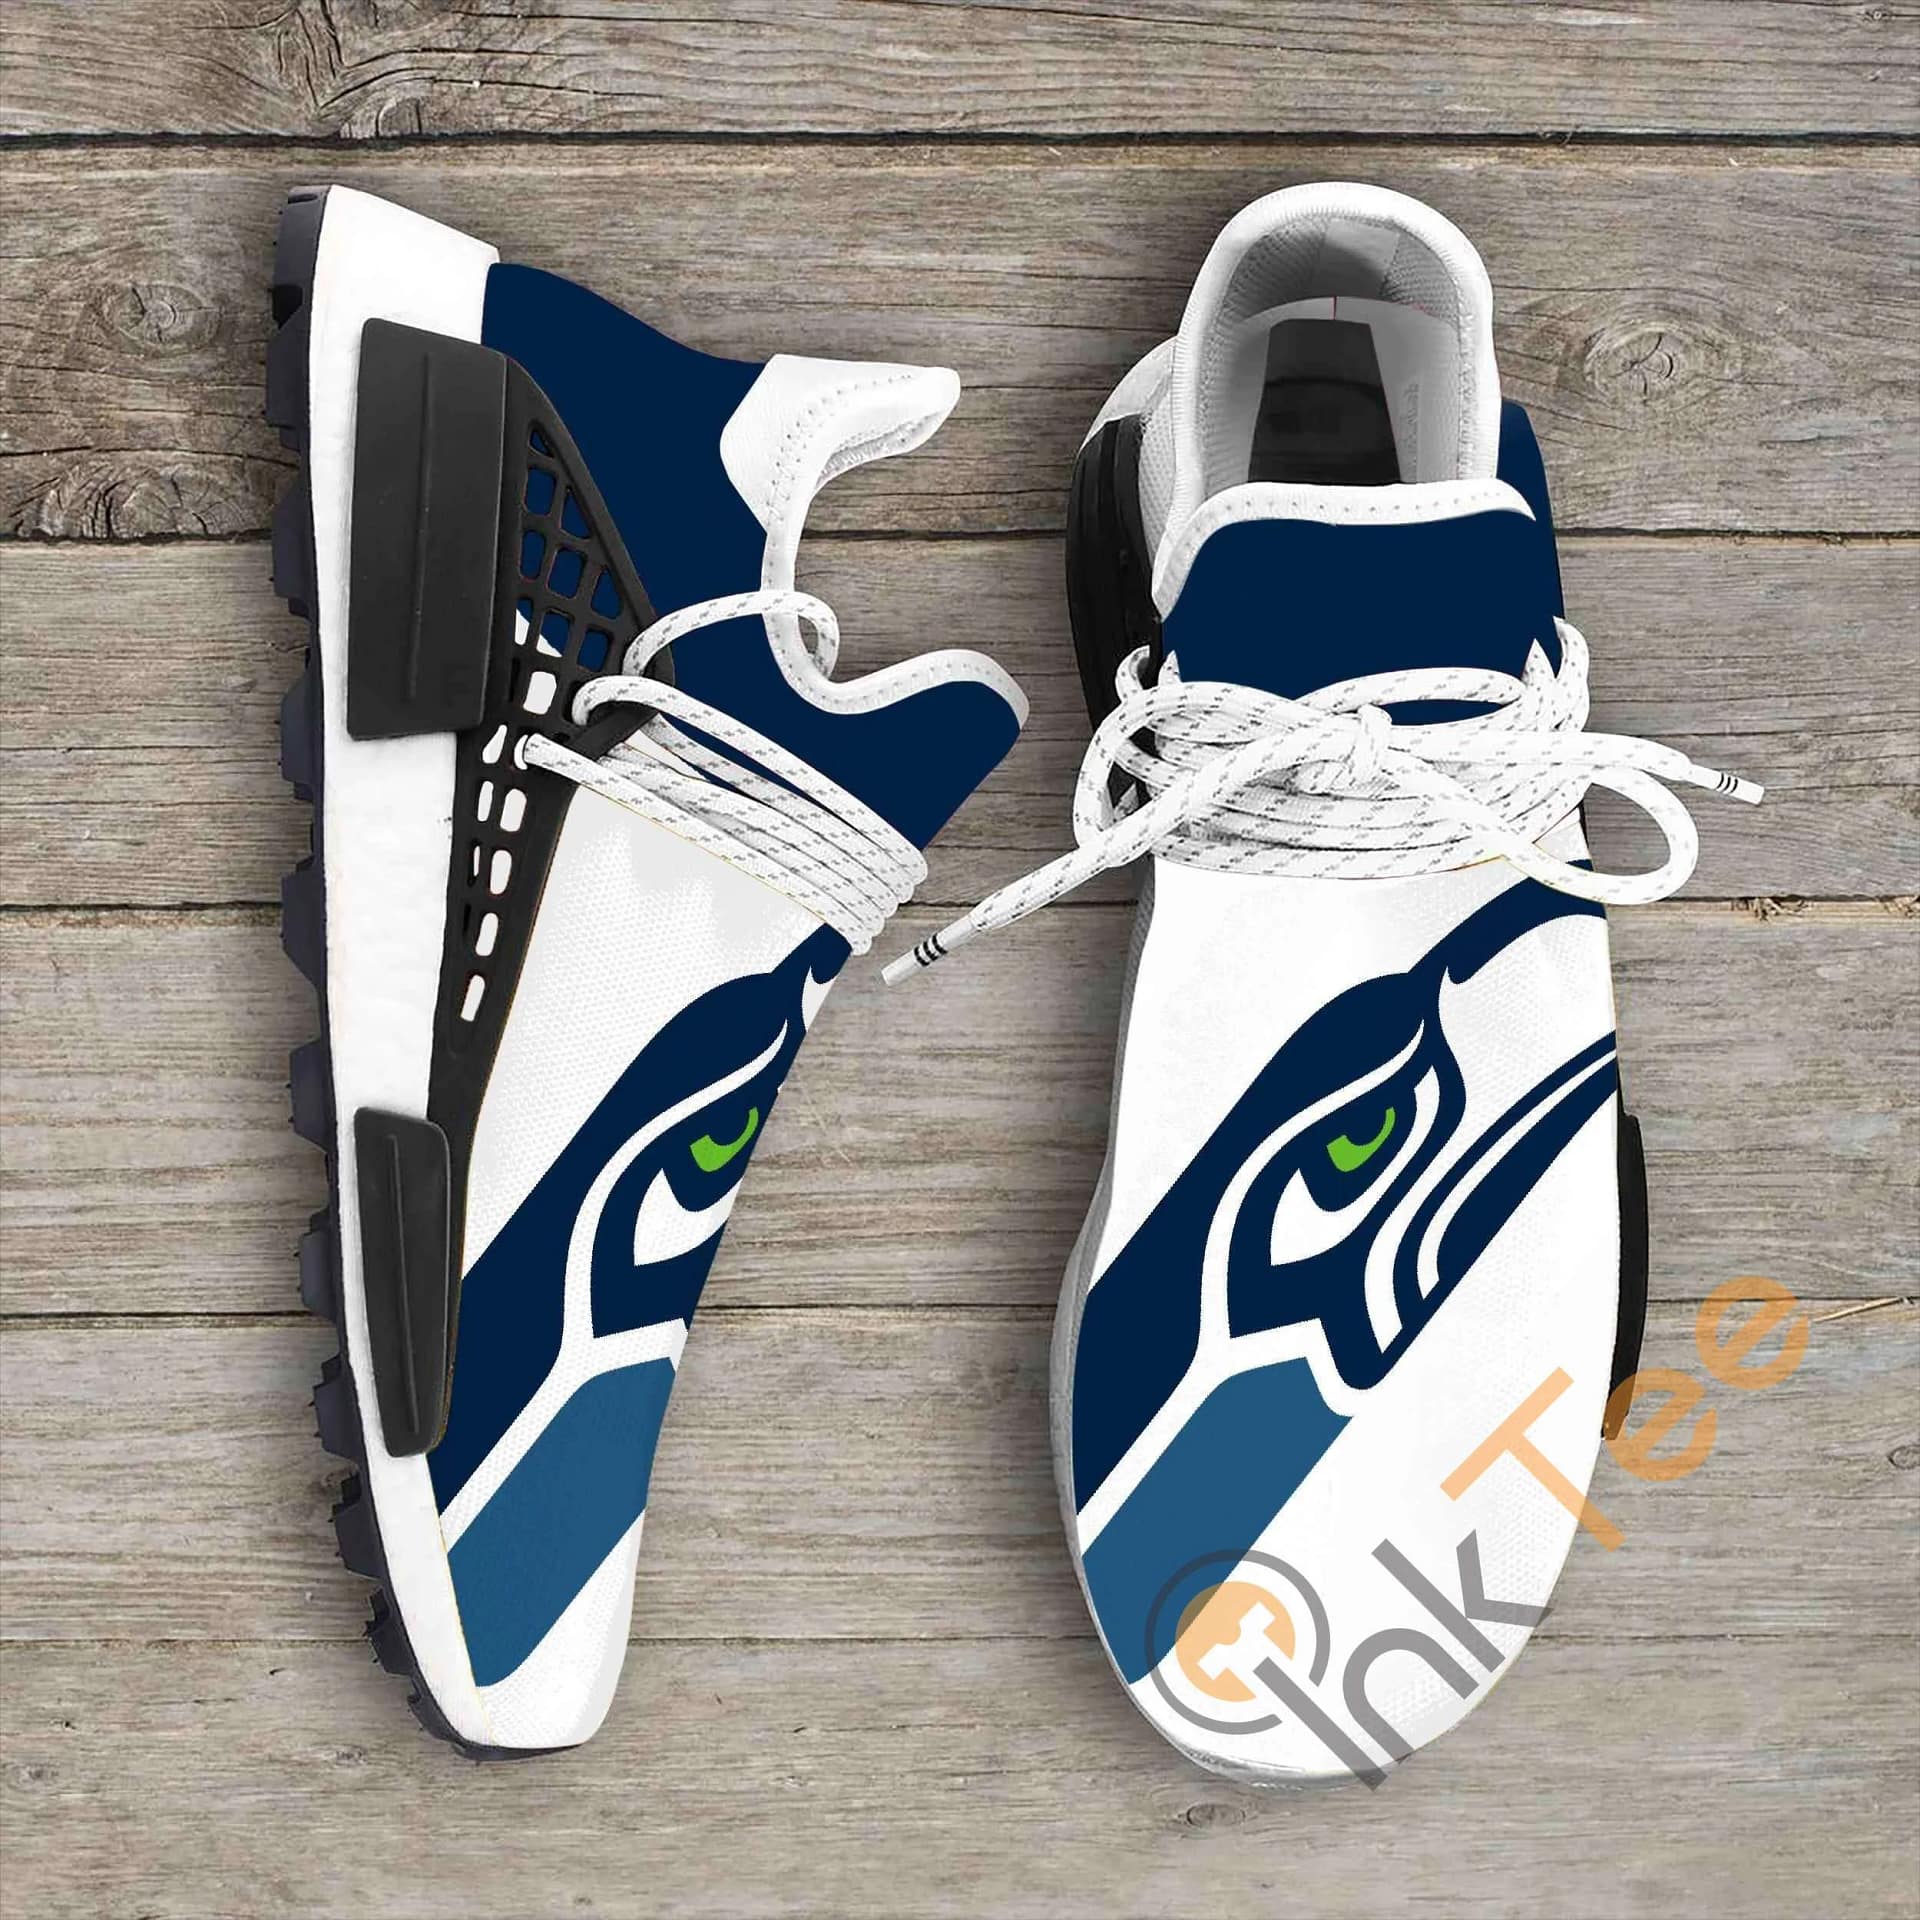 Seattle Seahawks Nfl NMD Human Shoes